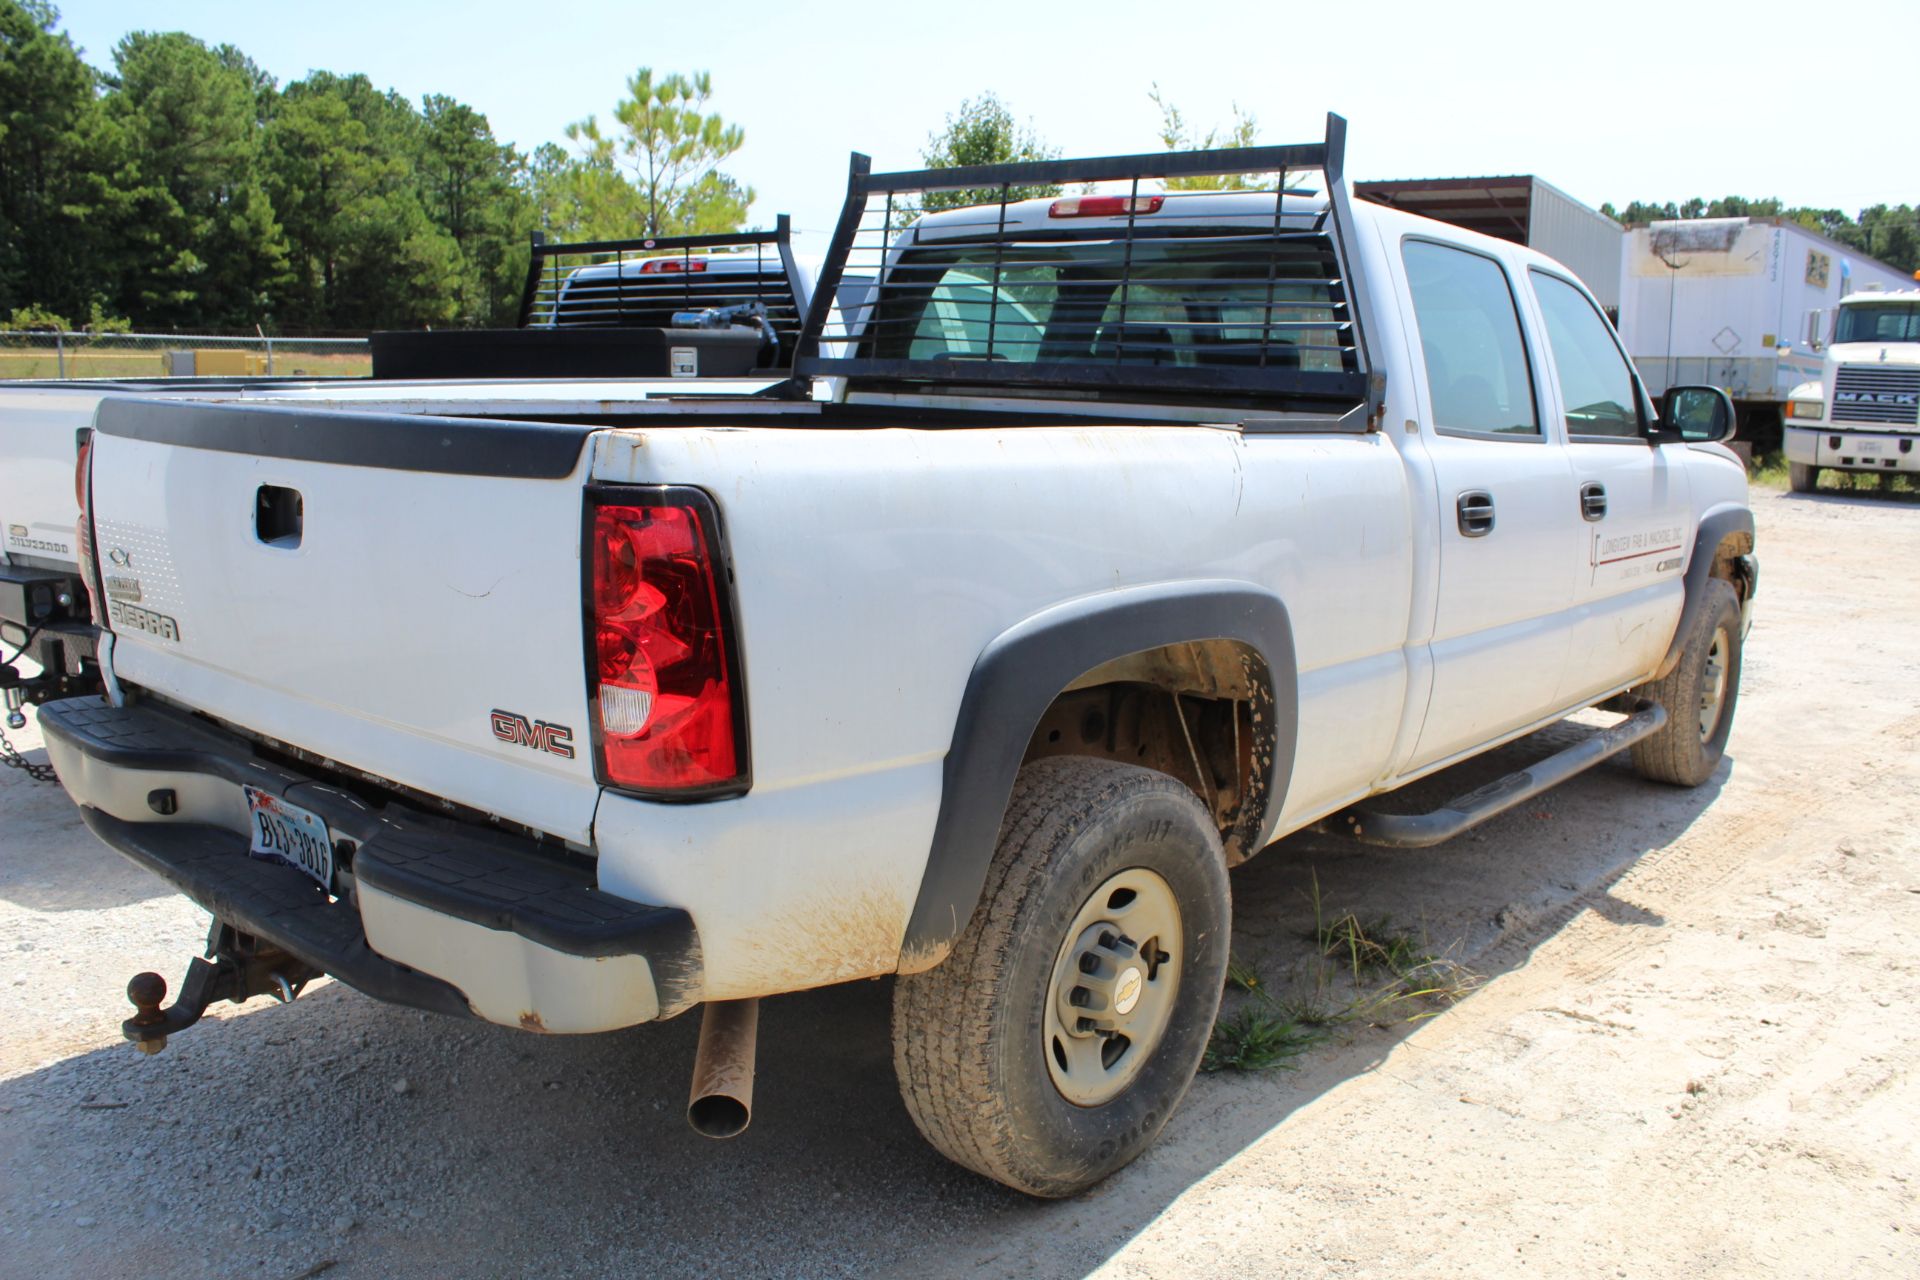 PICKUP TRUCK, 2005 CHEVROLET MDL. 2500HD, quad cab, Odo. reads: 168,073 miles - Image 3 of 6